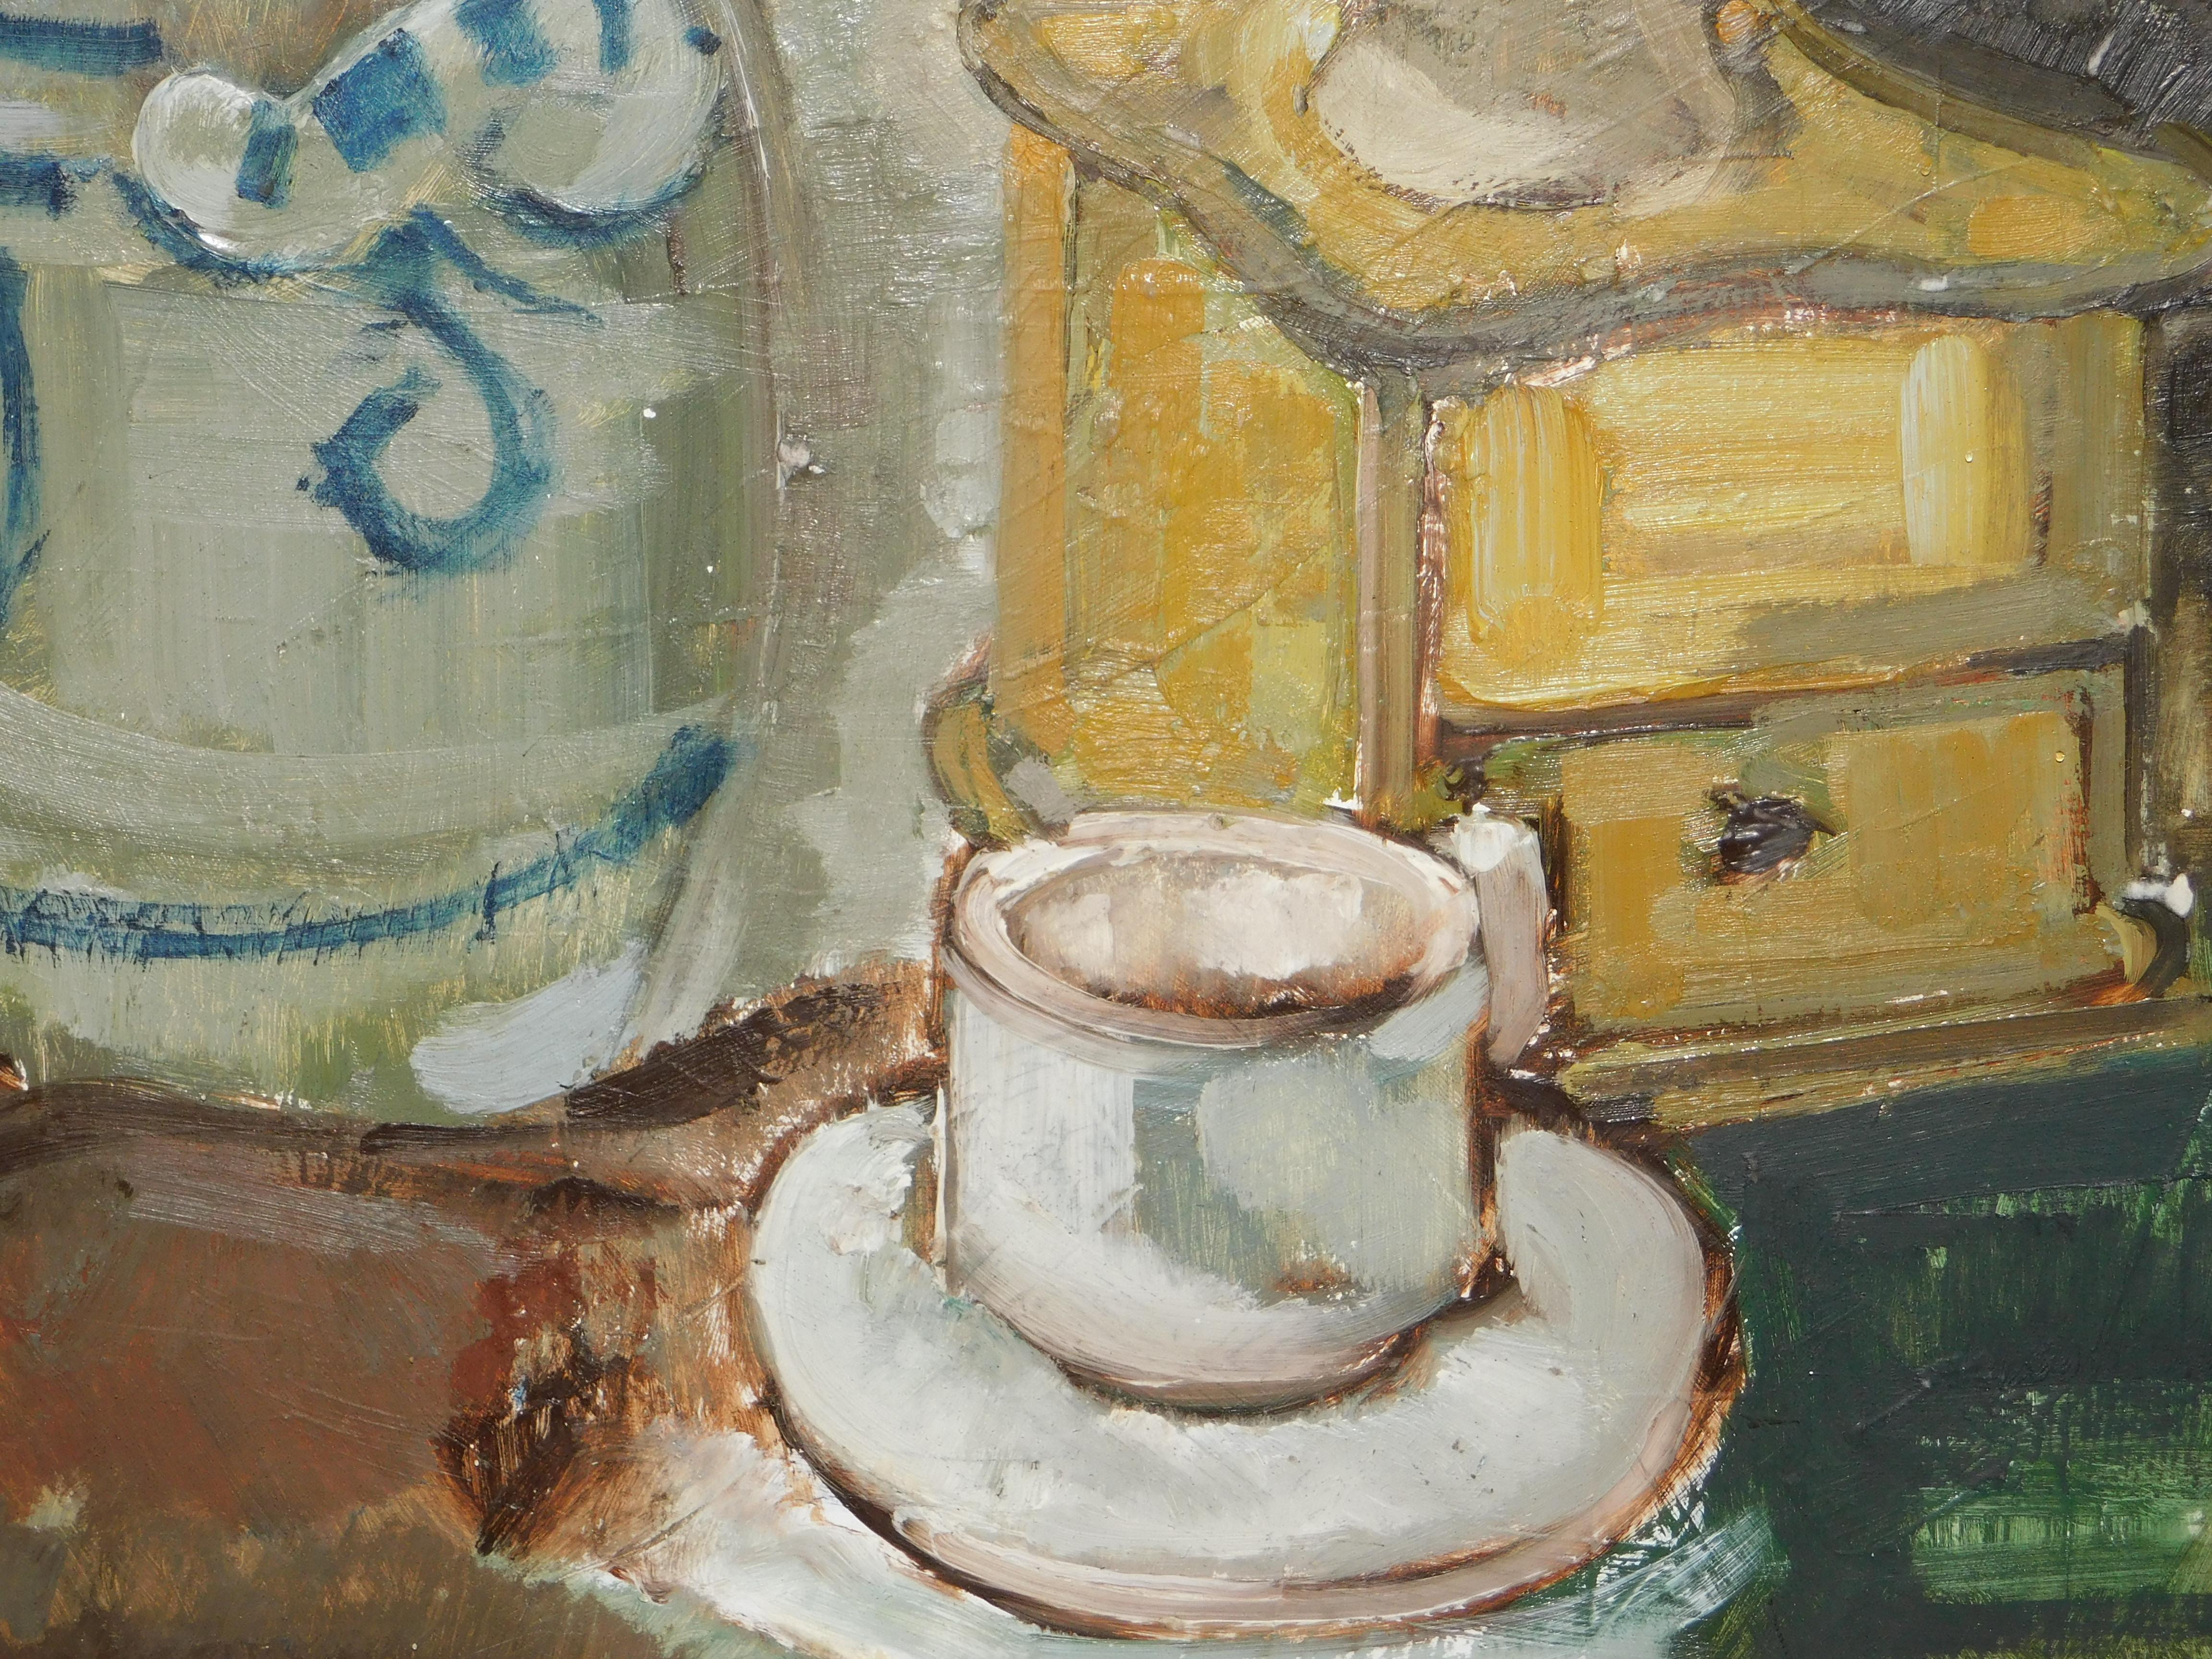 A still life painting of a very Belgian grouping of morning essentials ;coffee grinder, cup and ceramic jar that stores the coffee beans. Painted on board using the impasto painting technique incorporating thick layers of paint to achieve